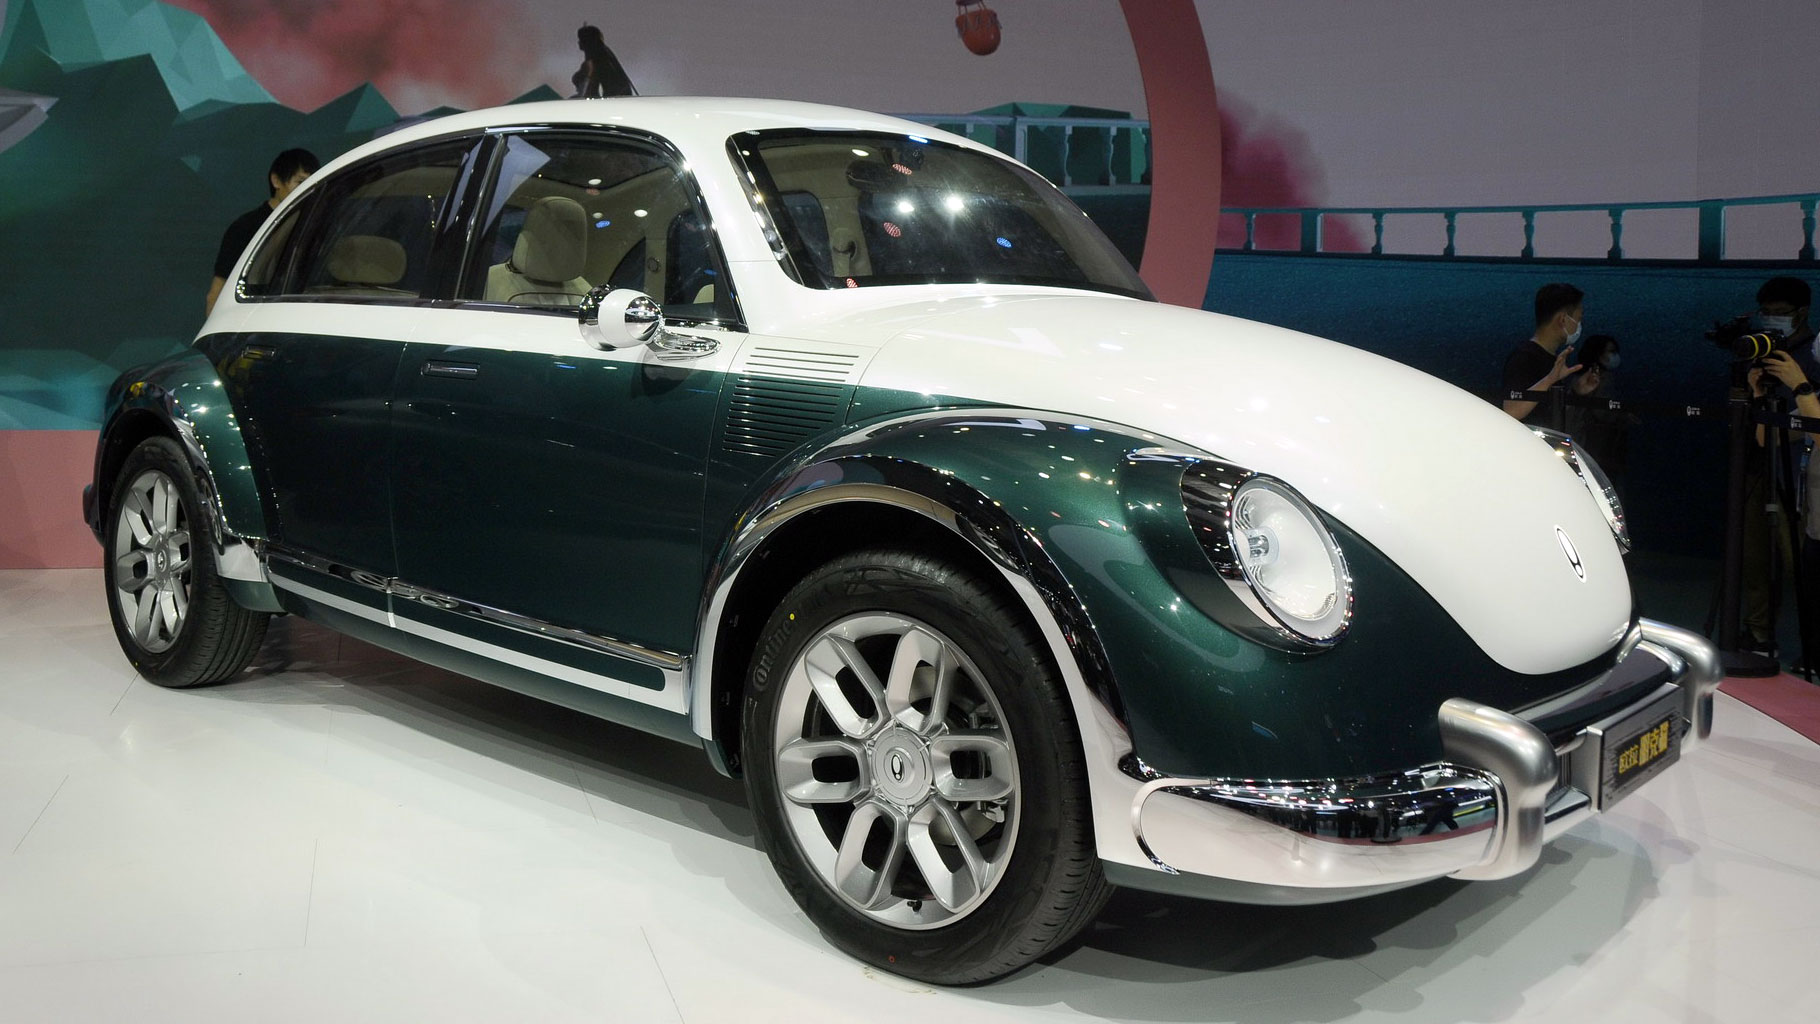 VW Lawyers Looking Into Great Wall's ORA Electric Beetle RipOff From